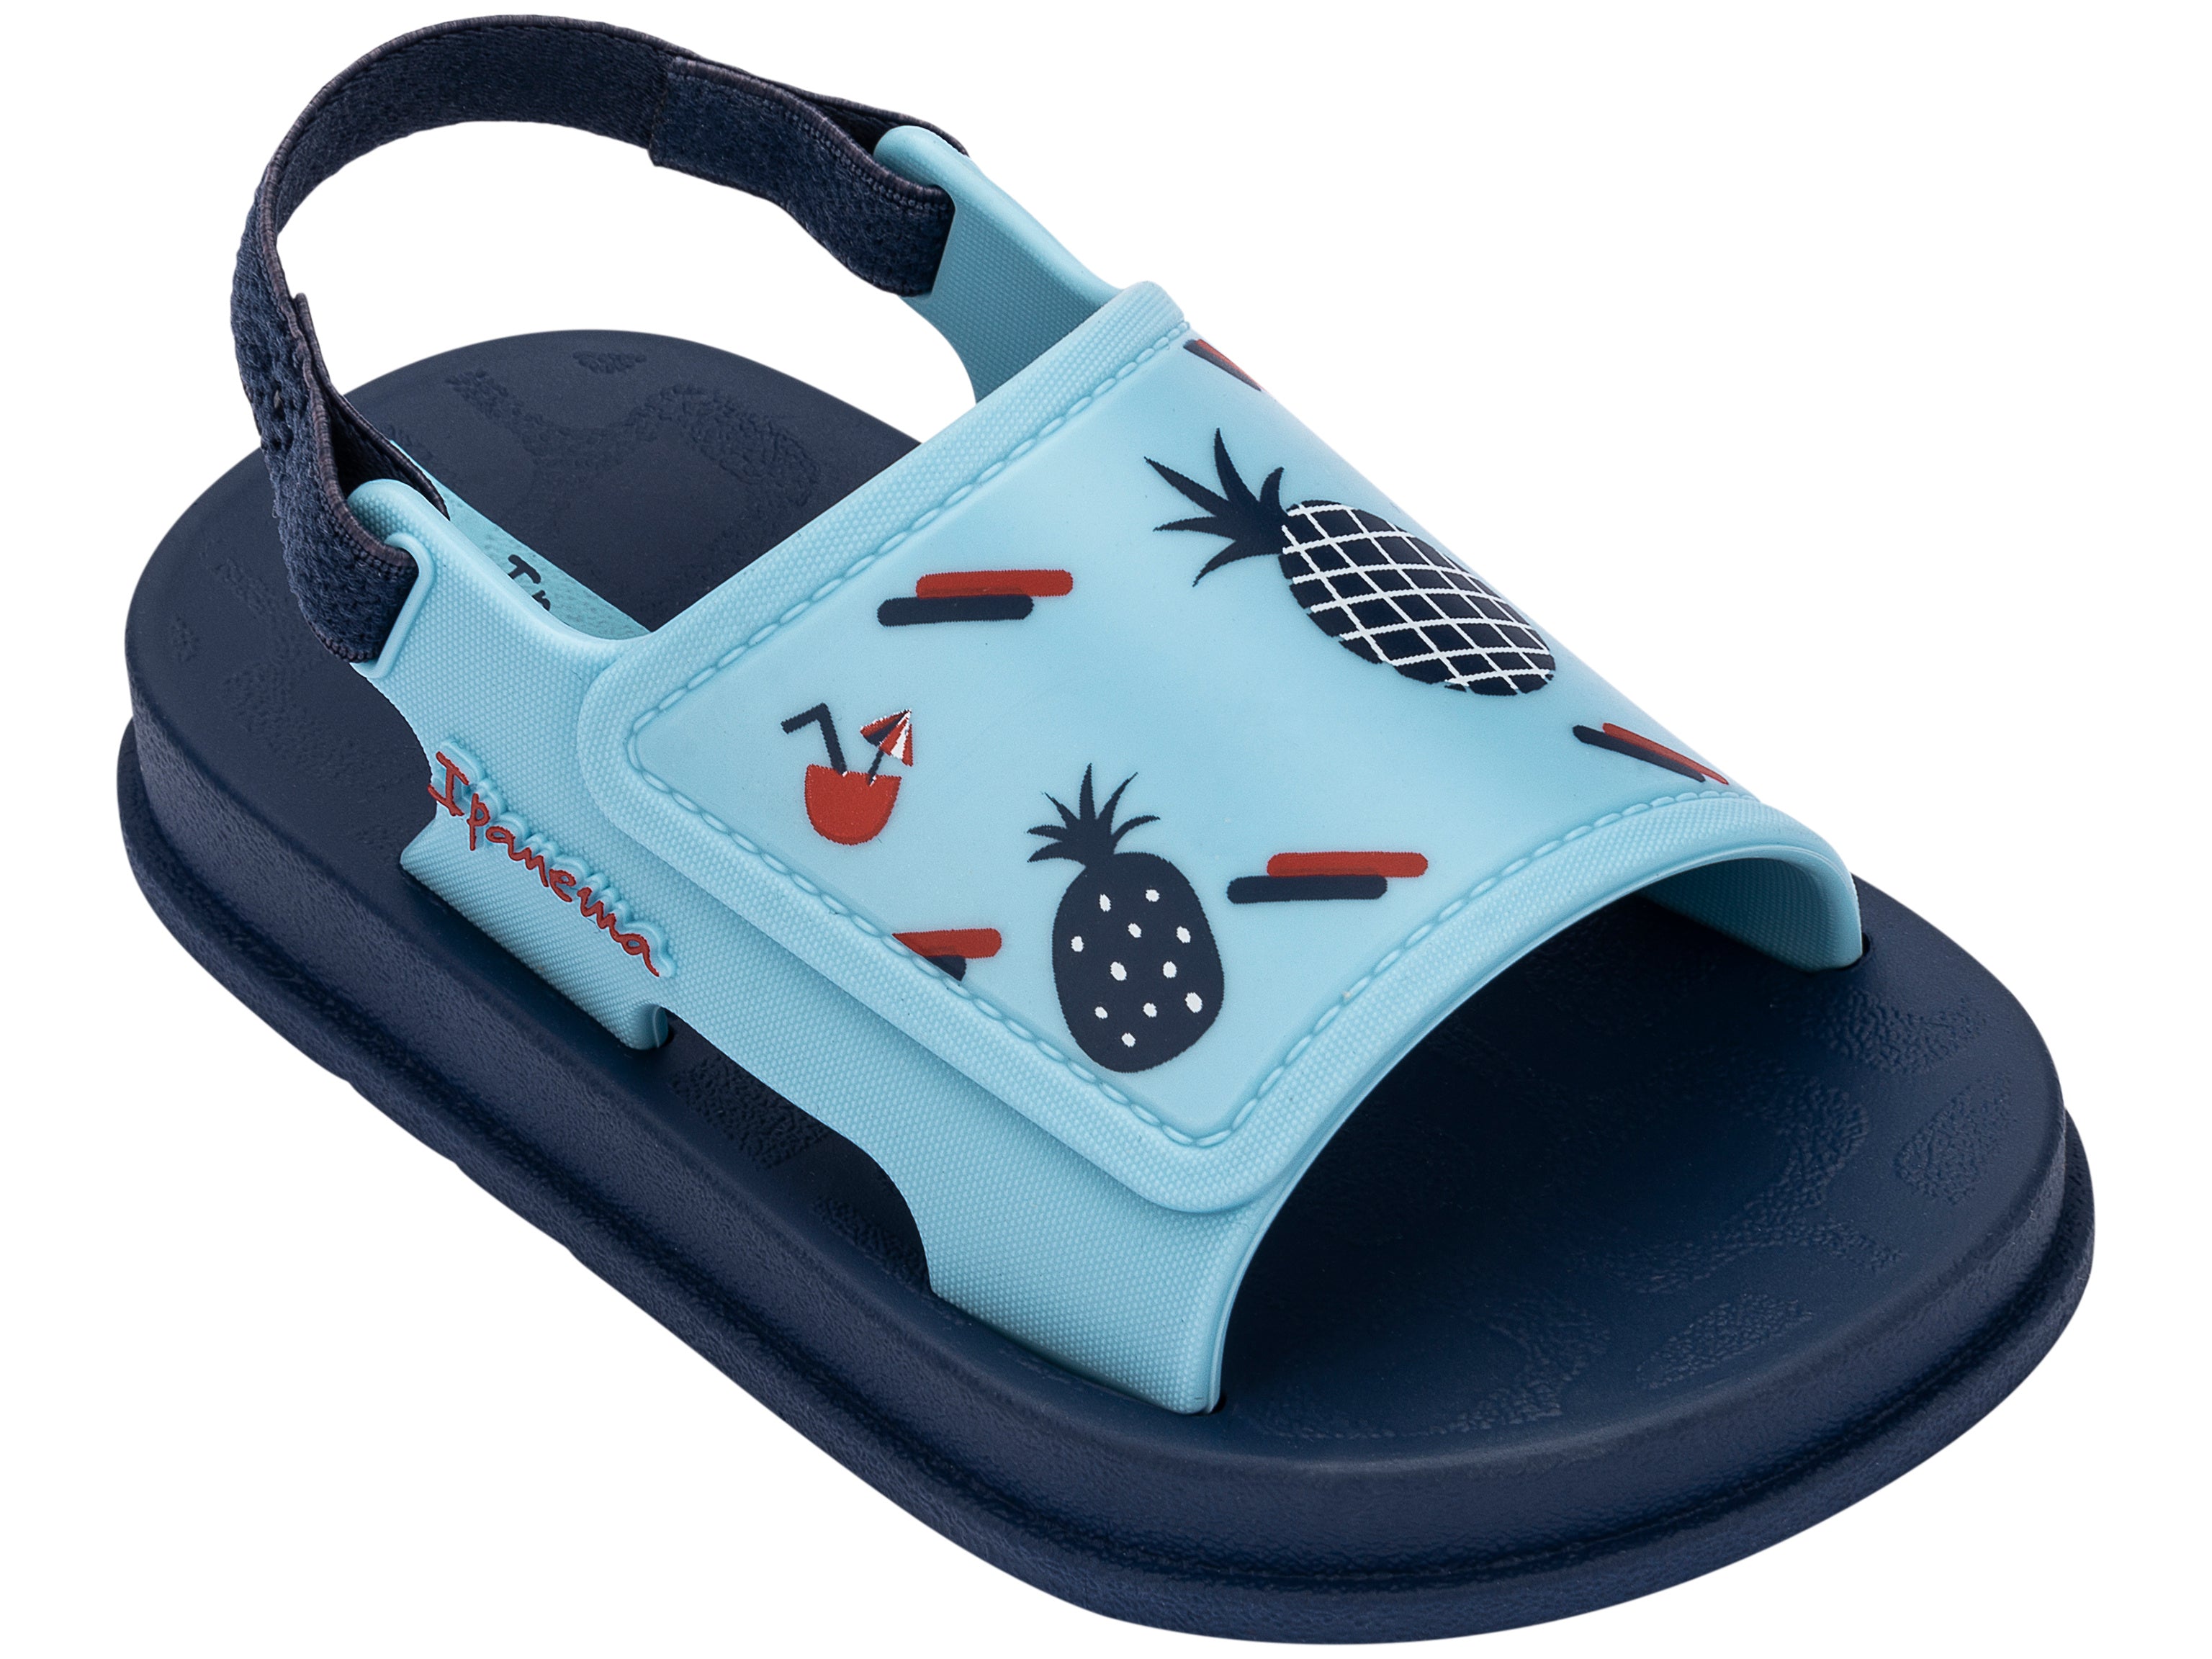 Angled view of a blue Ipanema Soft baby sandal with fruit print on the upper.